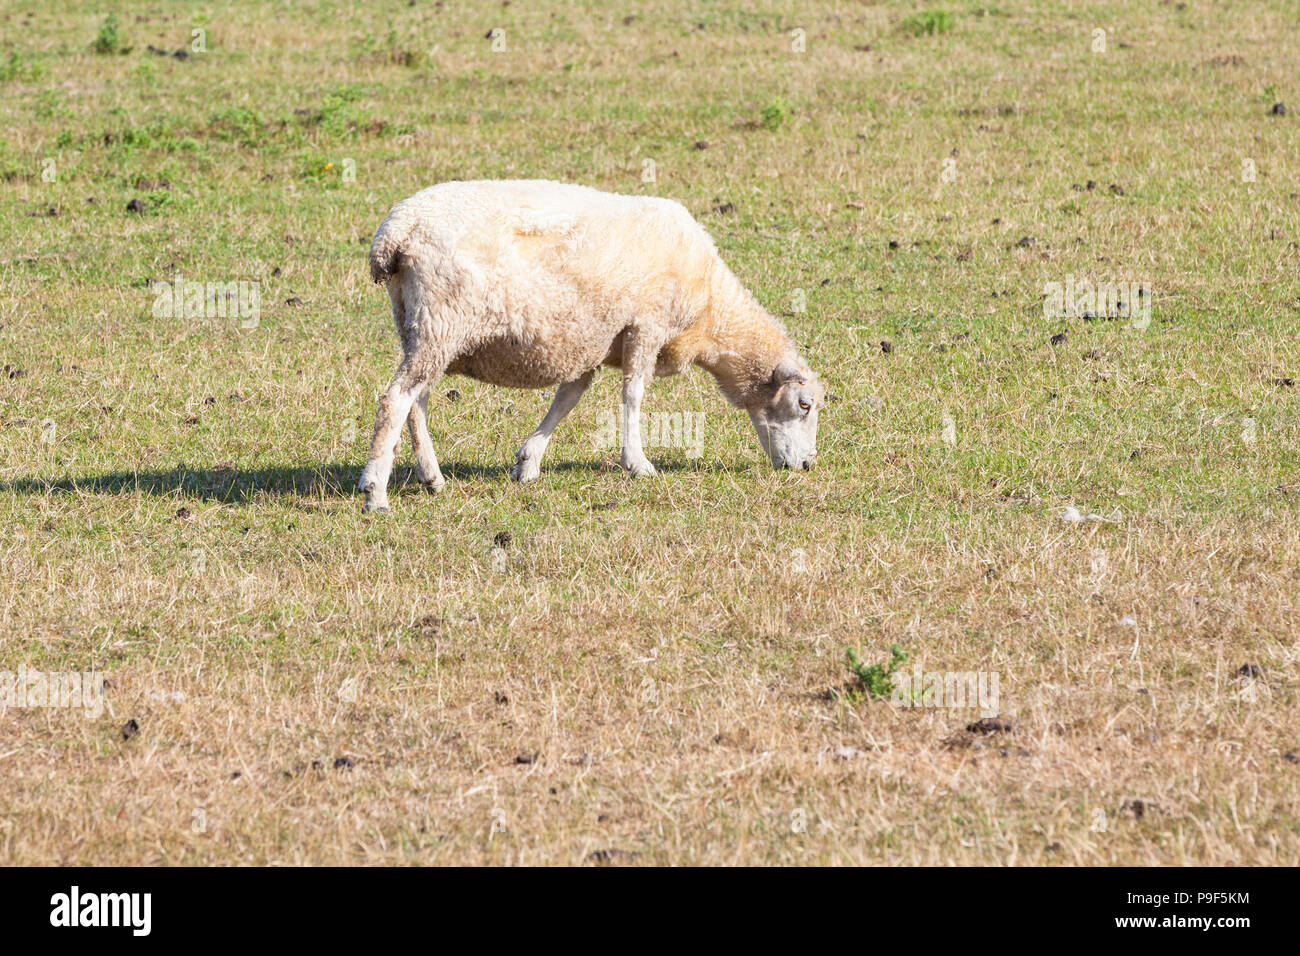 Ashford, Kent, UK. 18th Jul, 2018. UK Weather: With no signs of rain these sheep graze in fields that has had no rain for several weeks now, dead patches are starting to appear all over this large field on the outskirts of Ashford, Kent. © Paul Lawrenson 2018, Photo Credit: PAL Images / Alamy Live News Stock Photo